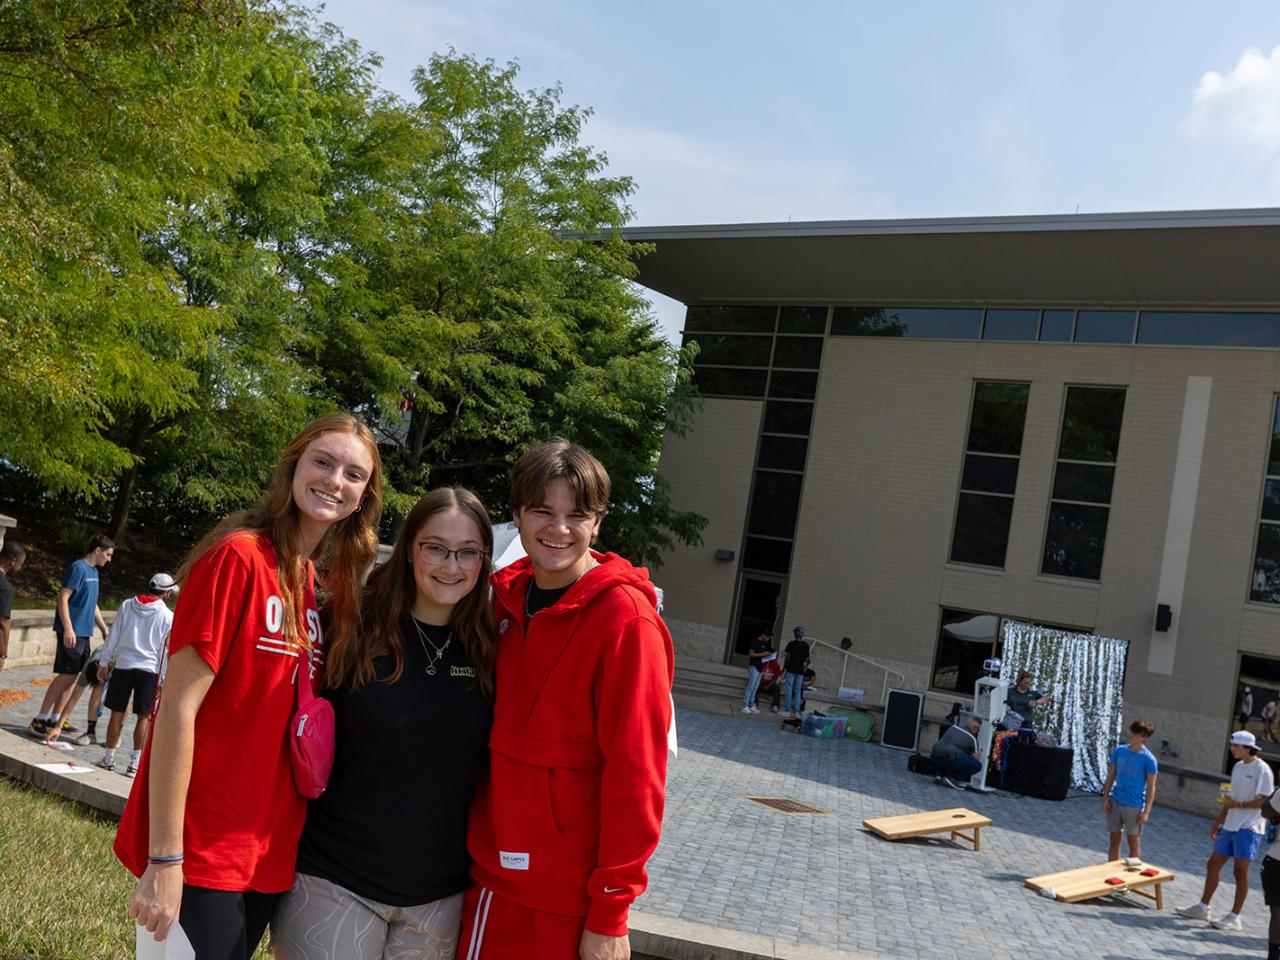 Three students huddle together to pose for a picture during the post-Convocation lunch outside the Warner Center.